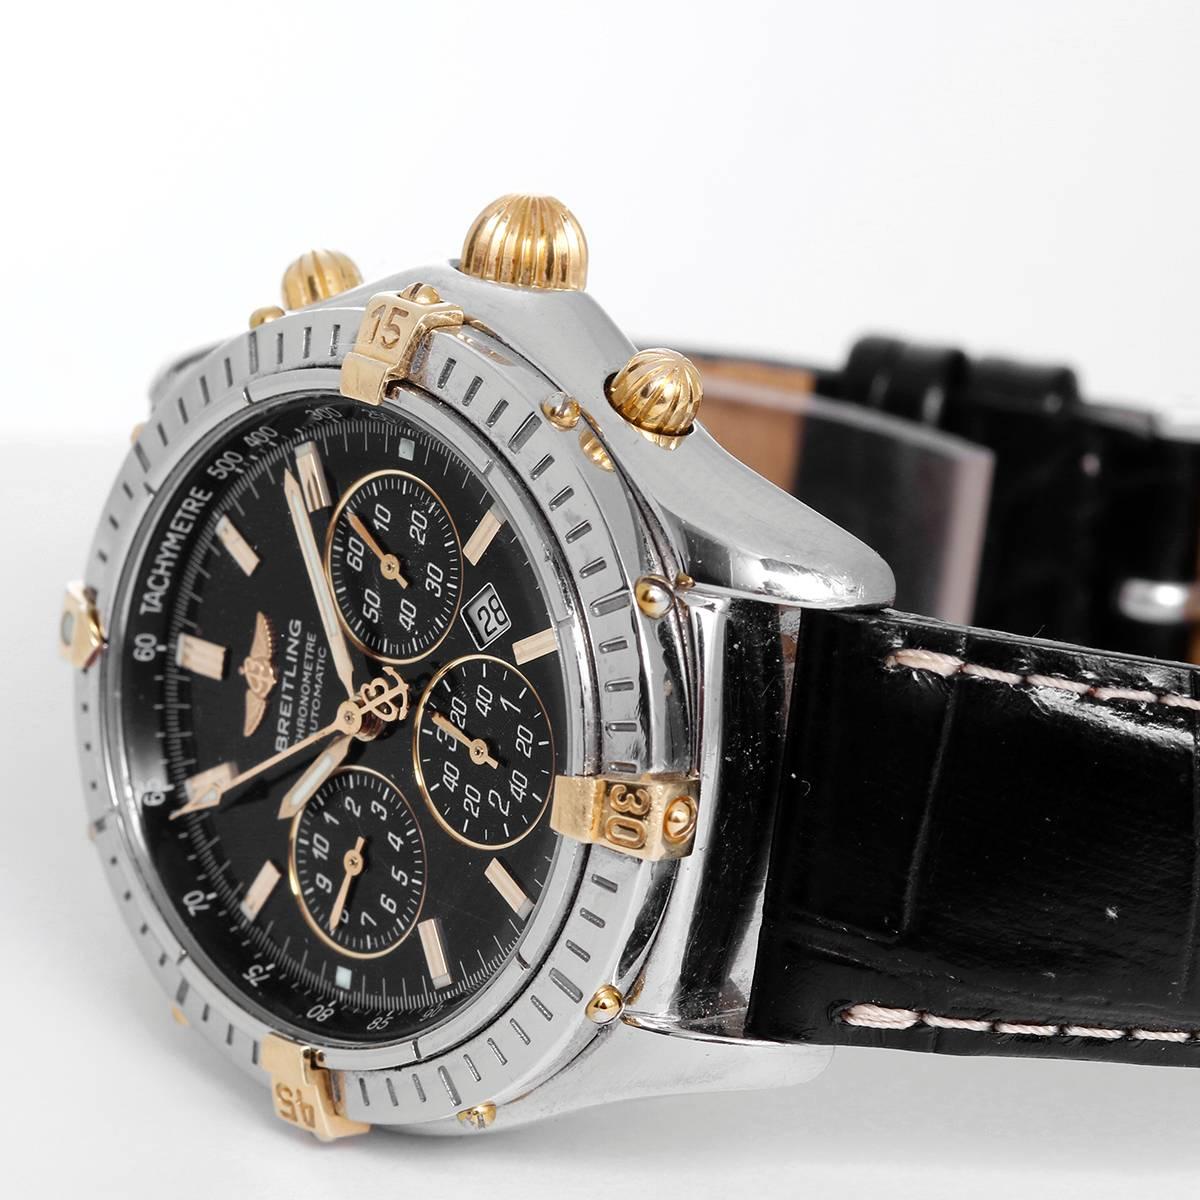 Breitling Shadow Flyback B35312 Men's Chronograph Watch B35312 -  Automatic winding chronograph with date. Stainless steel and 18k yellow gold case with rotating bezel (38mm diameter). Black dial with markers. Black strap band. Pre-owned with